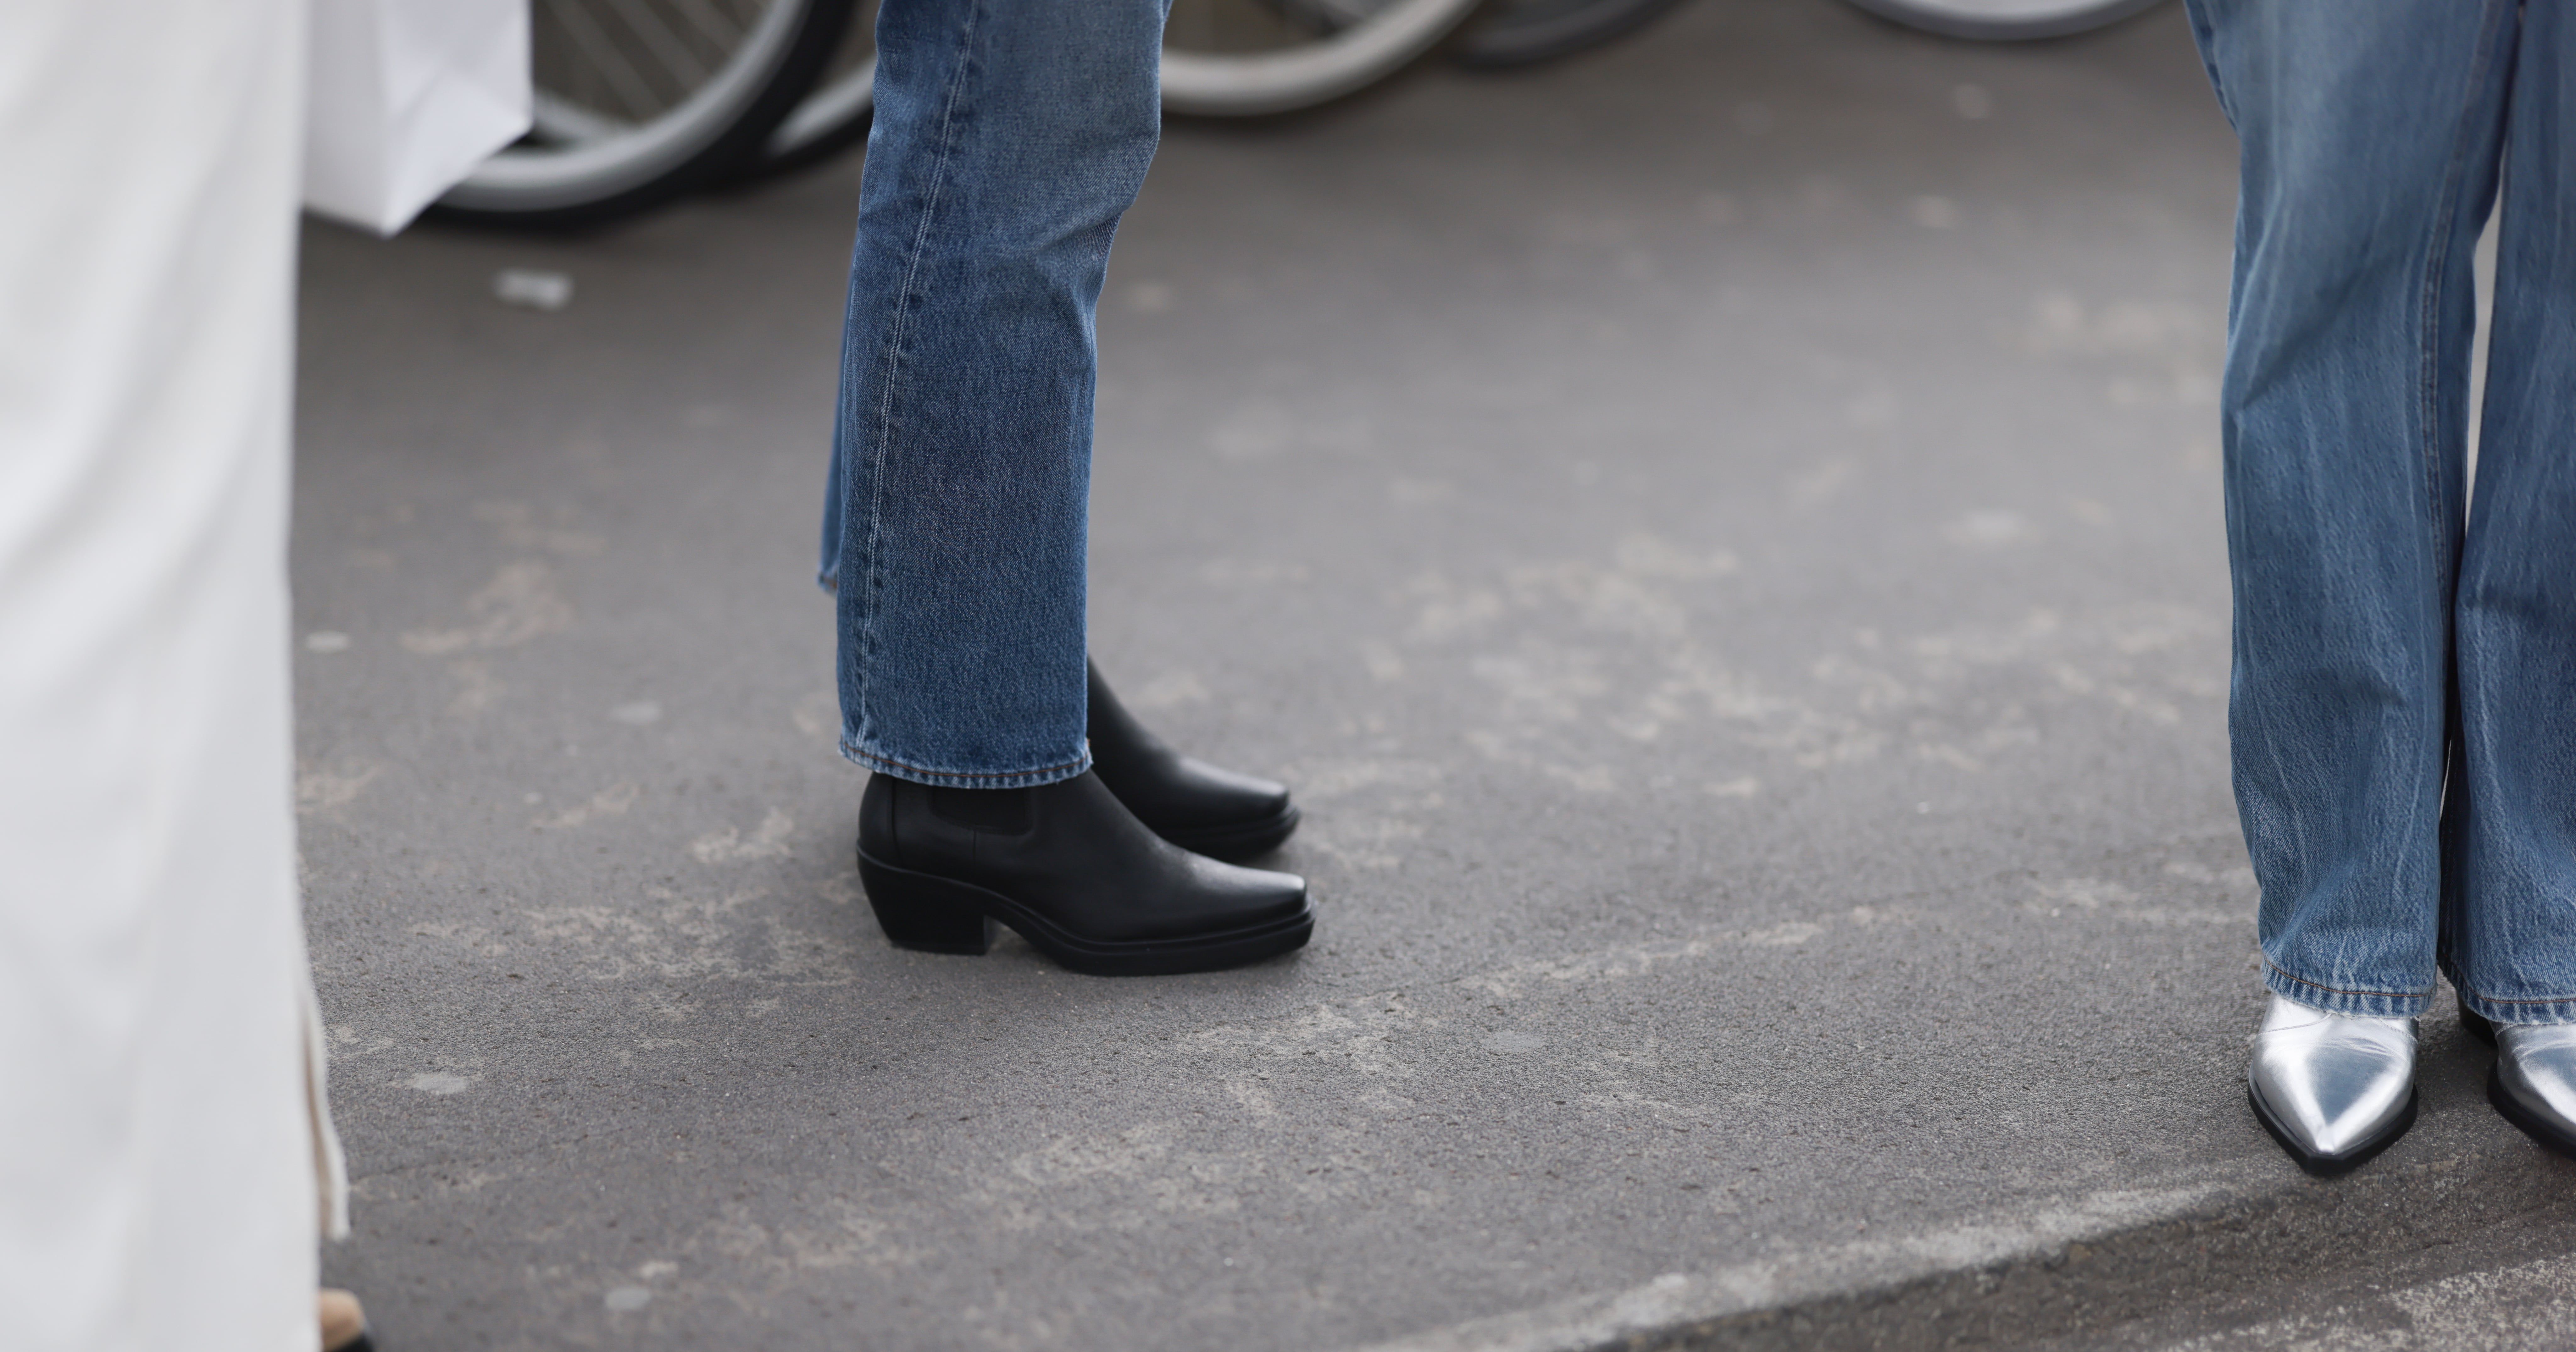 How to Wear Booties With Different Cuts of Jeans